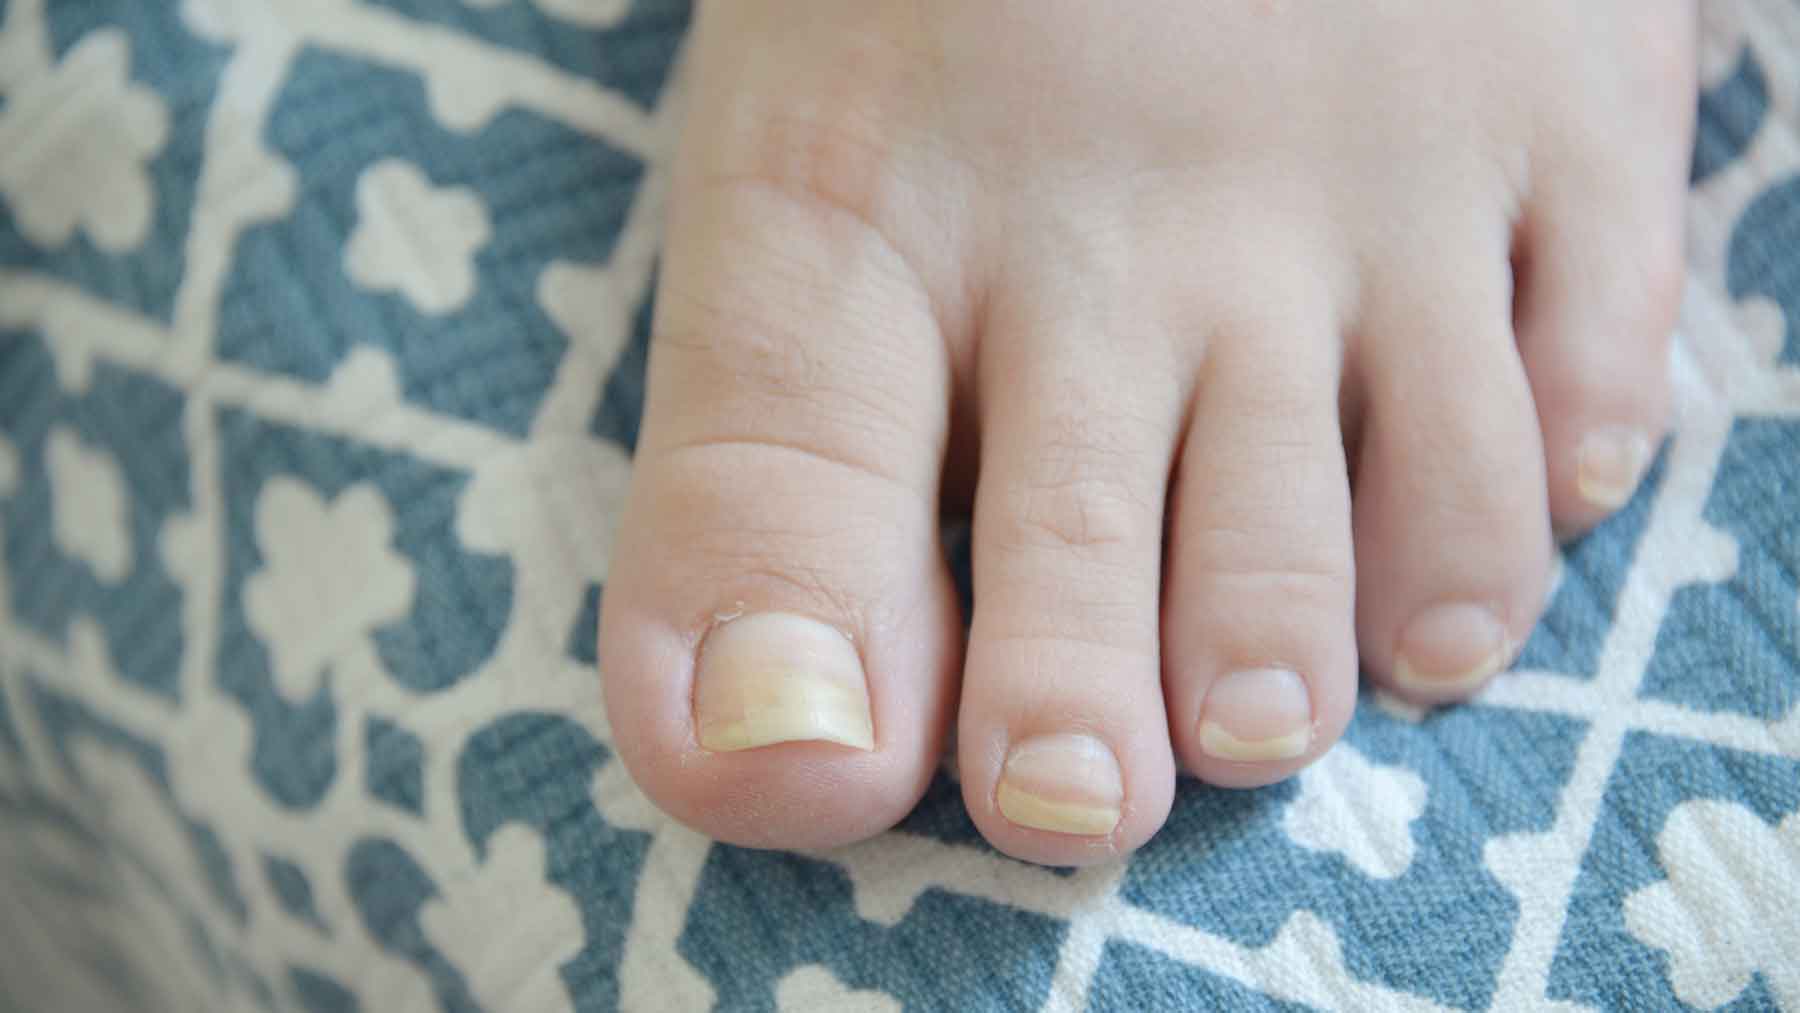 denise durand recommends what does white toes mean pic